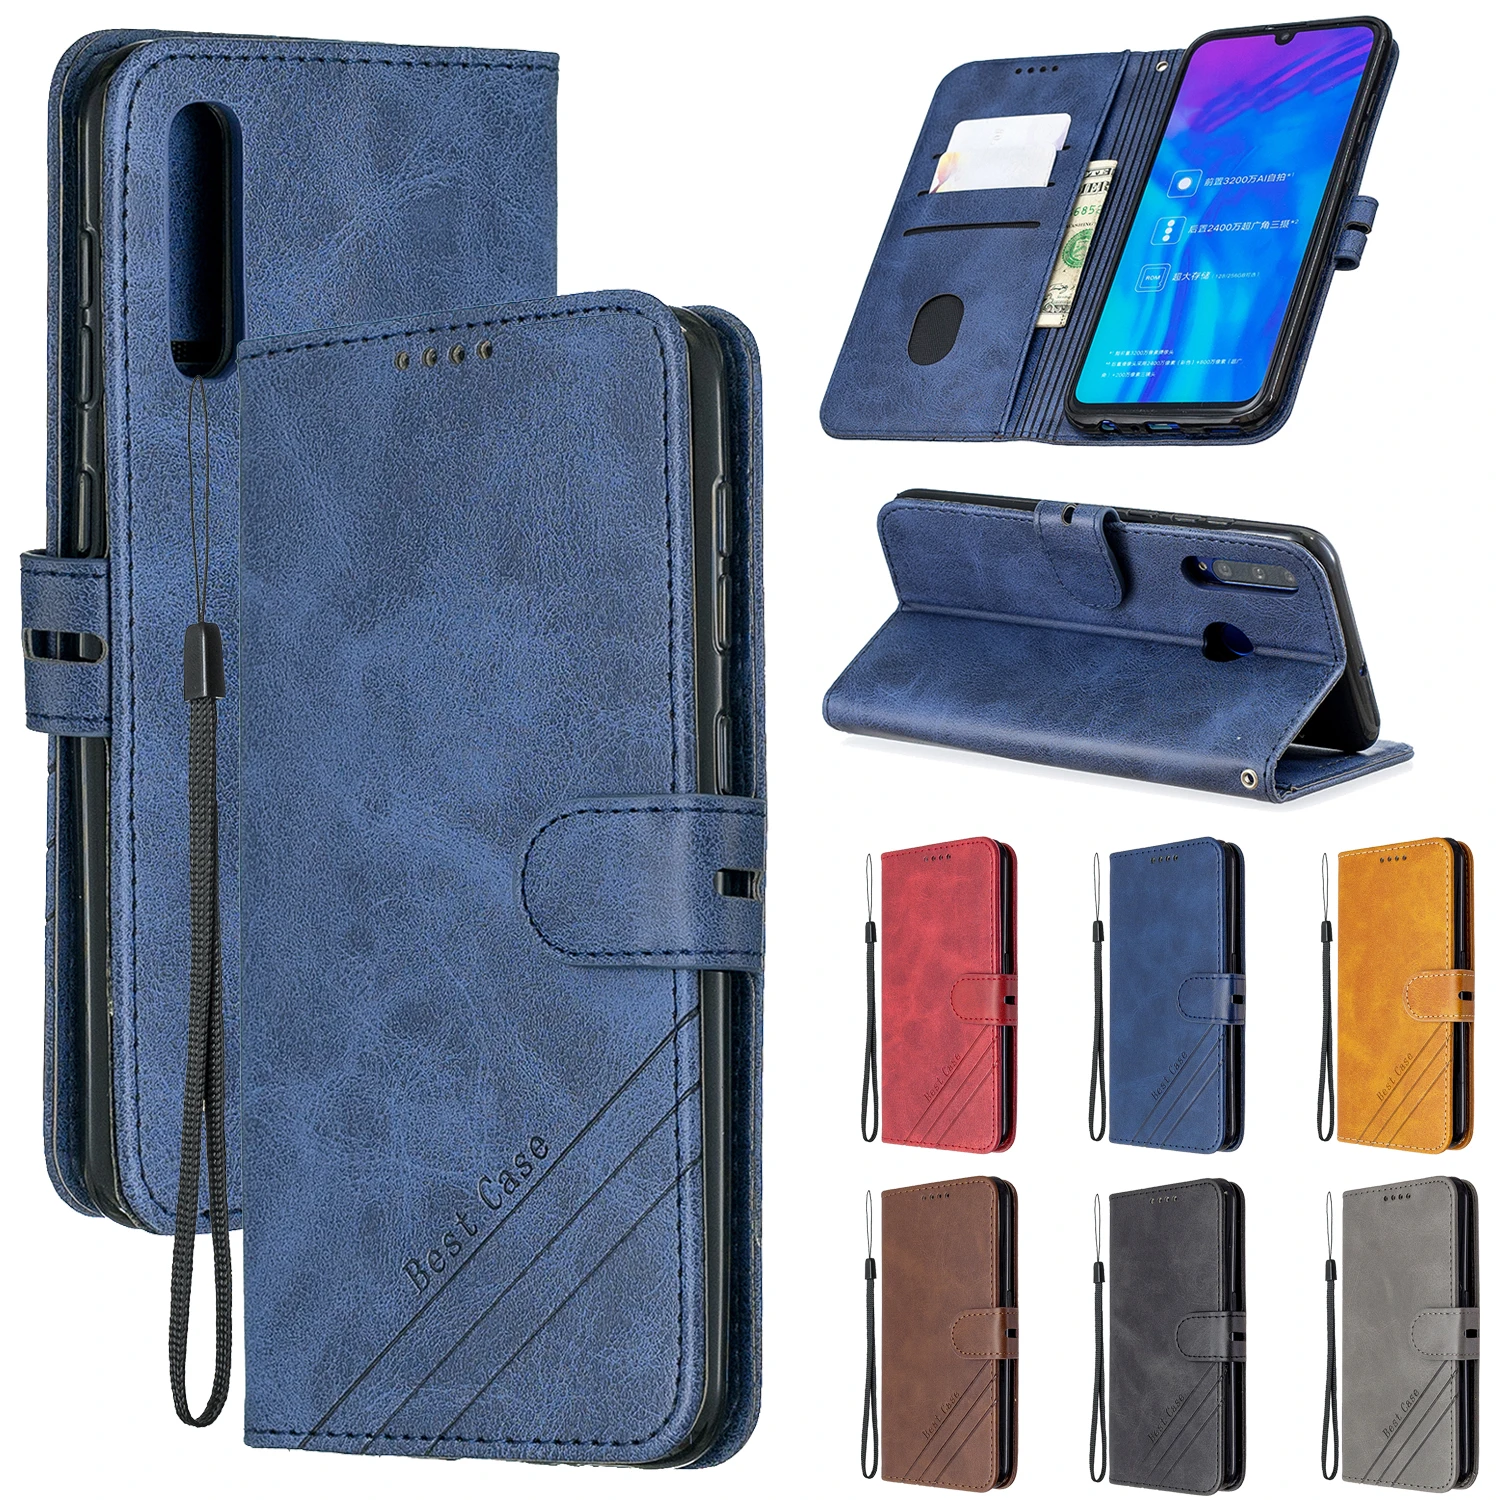 

Flip Leather Case For Samsung Galaxy A21S A10 A10S A20S A01 A11 A21 A31 A41 A51 A71 M21 A20E A20 A30 A30S A40 A50 A60 A70 Cover